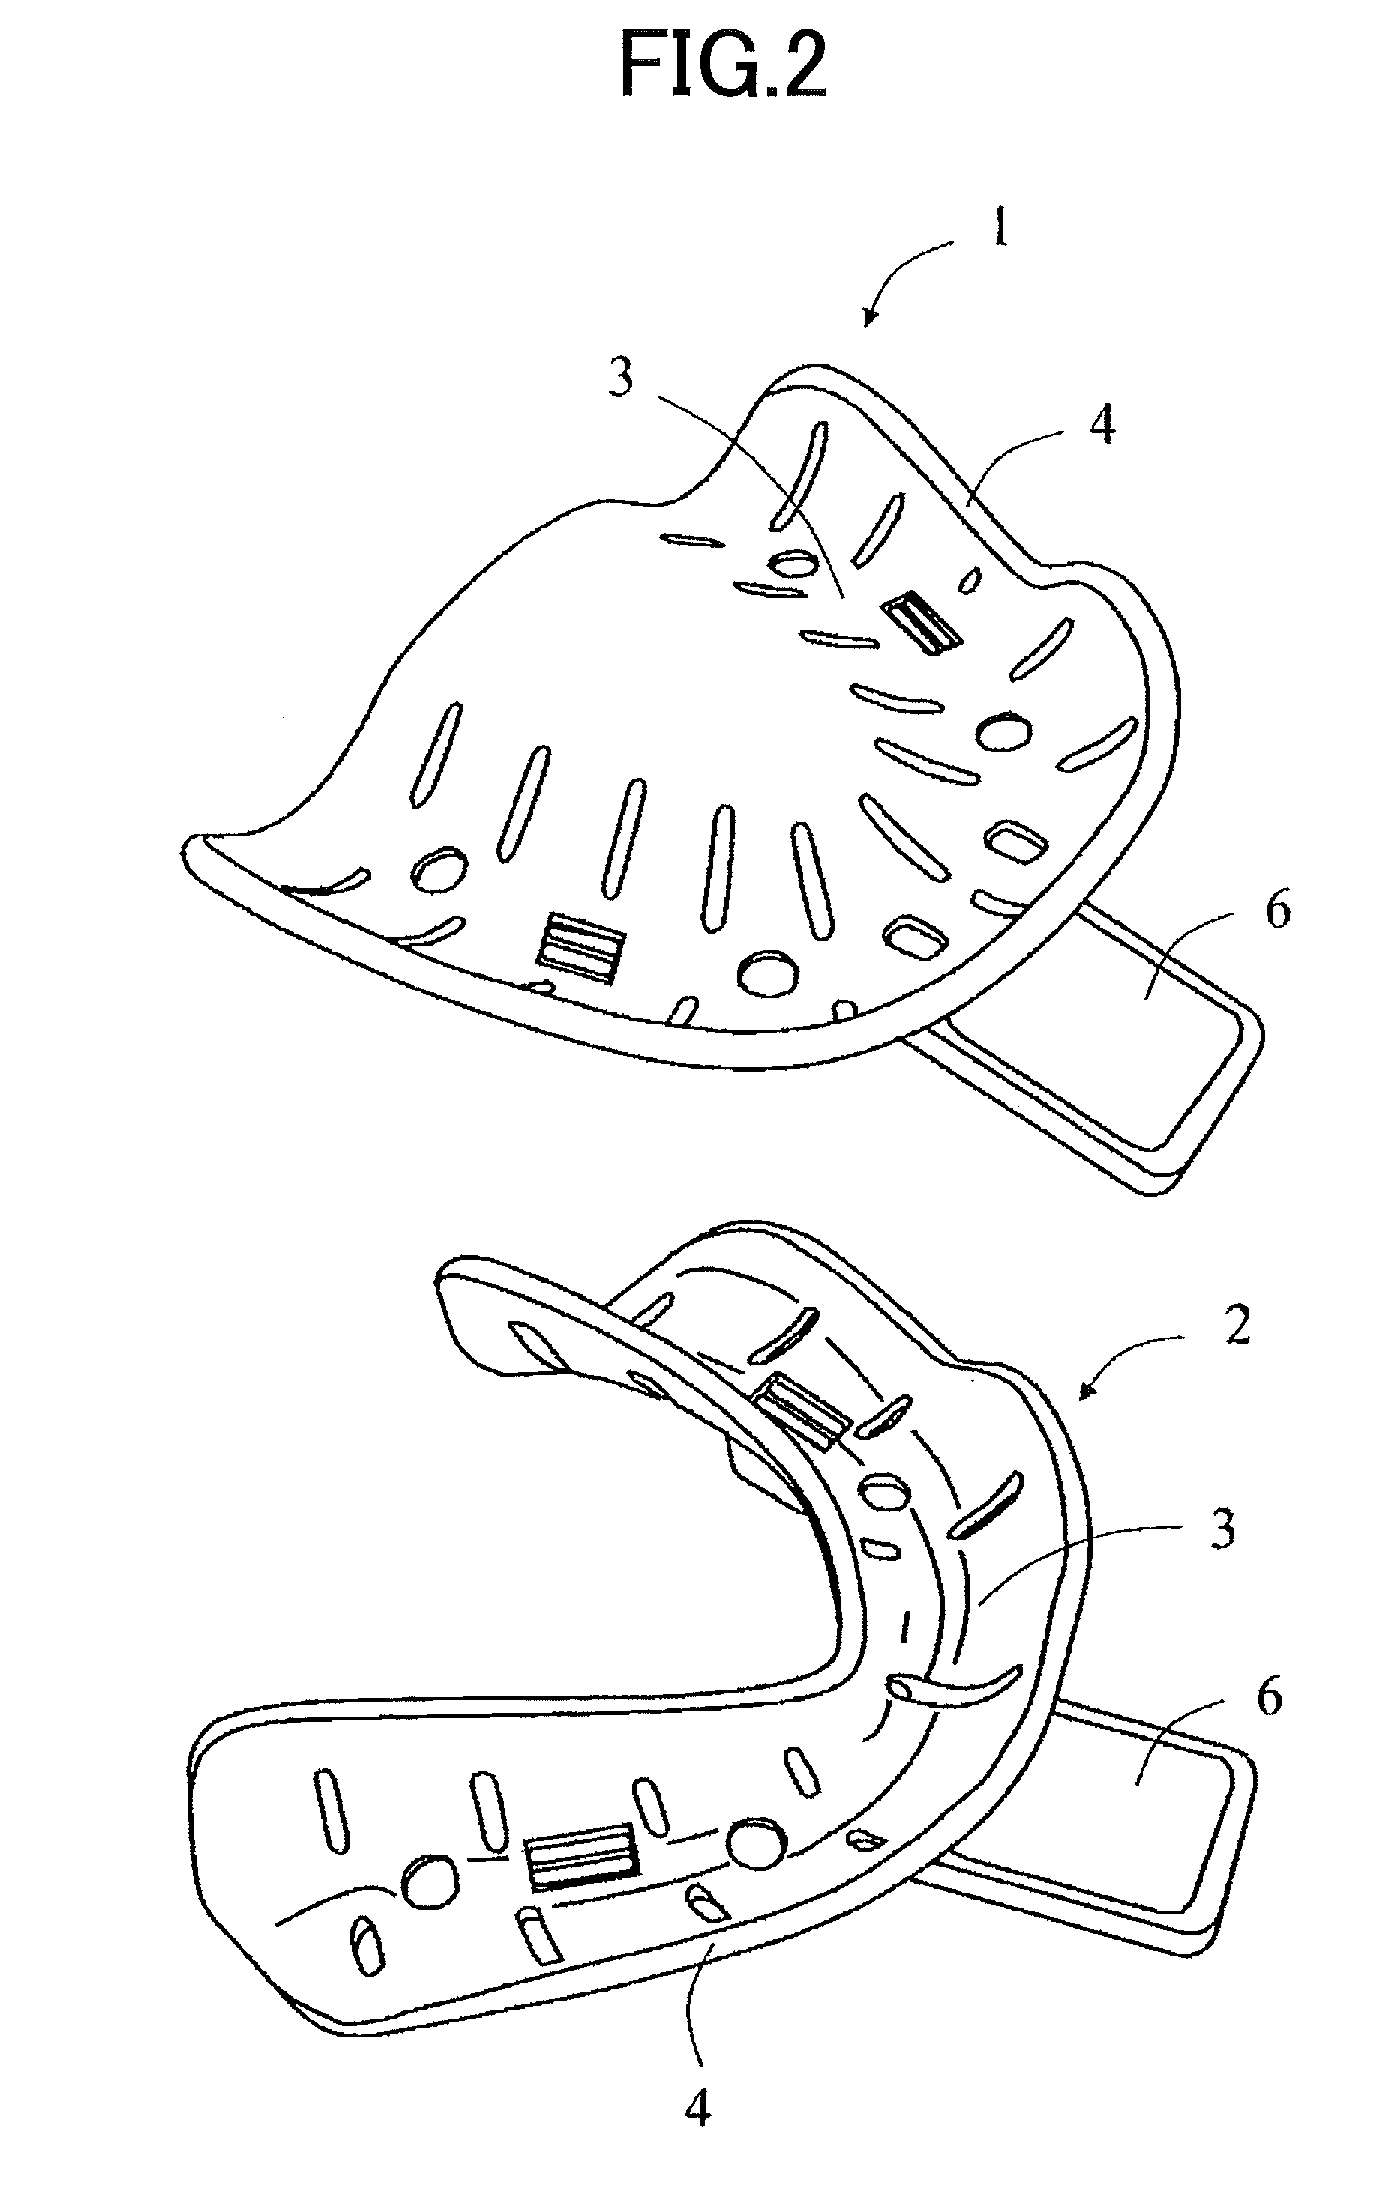 Impression tray set for edentulous jaw